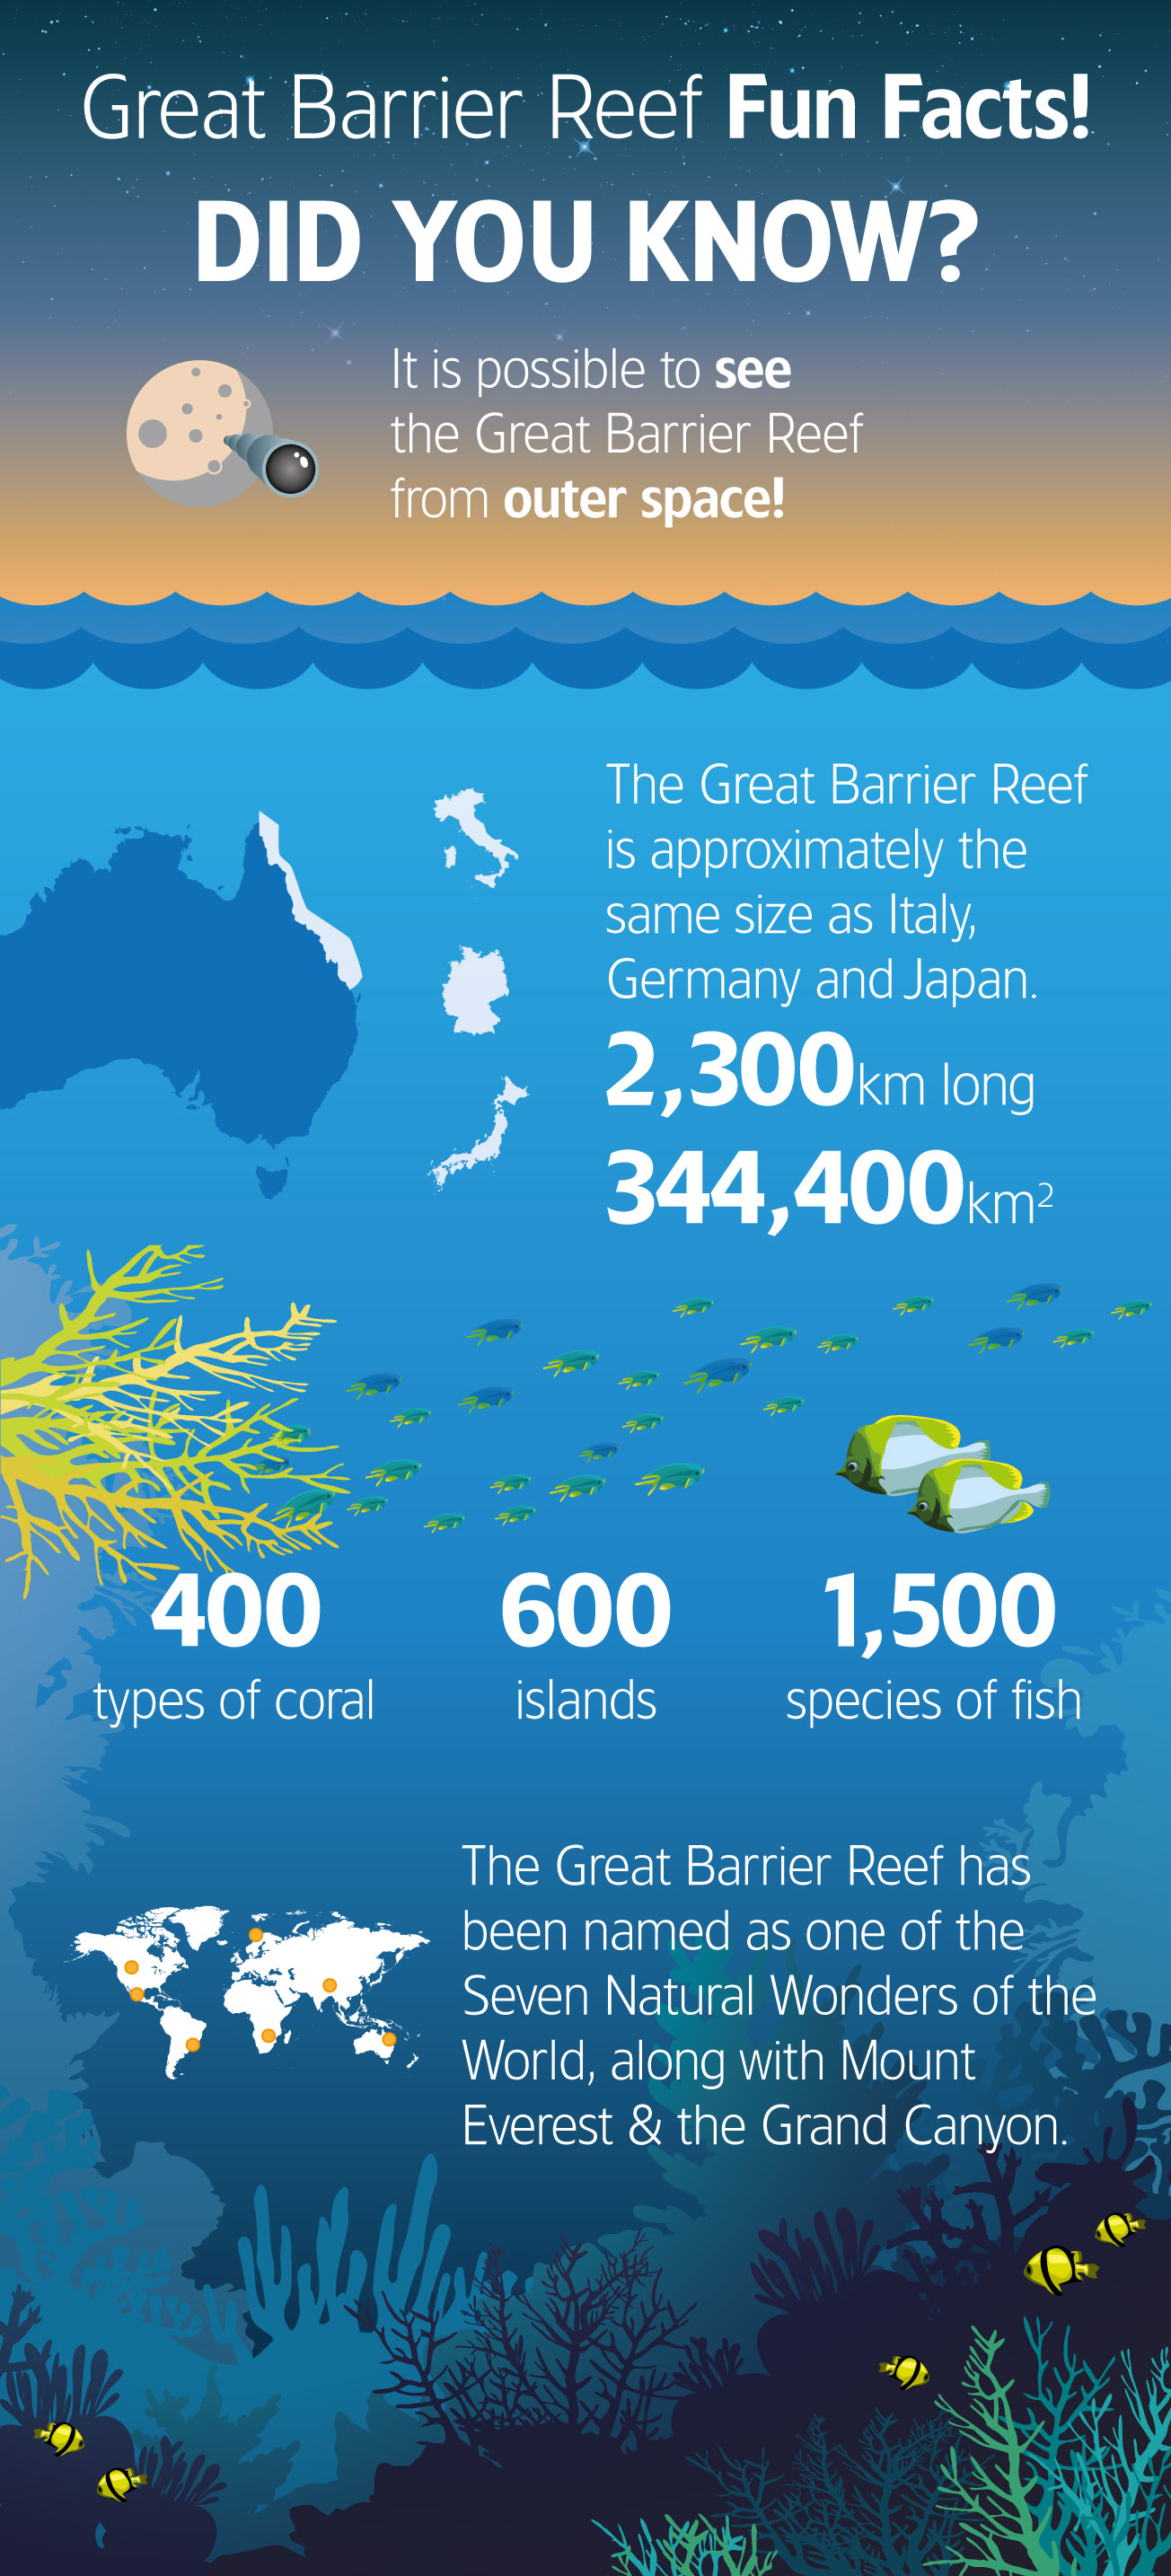 Great Barrier Reef - FUN FACTS - Mantra